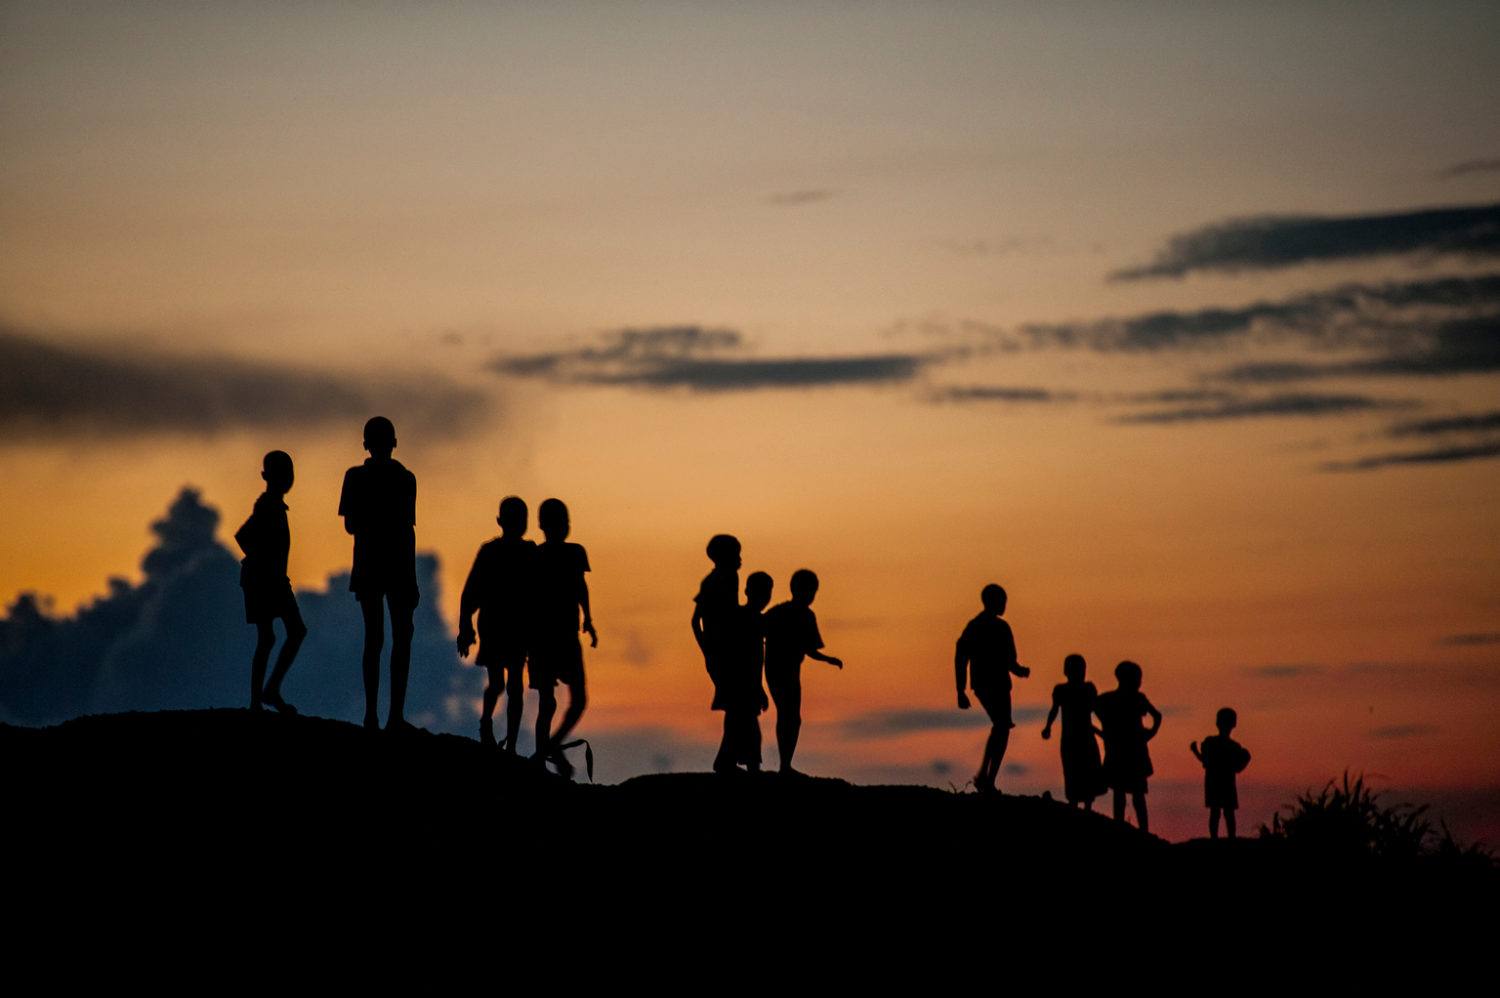 On 14 August 2016 in the Protection of Civilians (POC) site near Bentiu, in Unity State, South Sudan, children play at dusk.